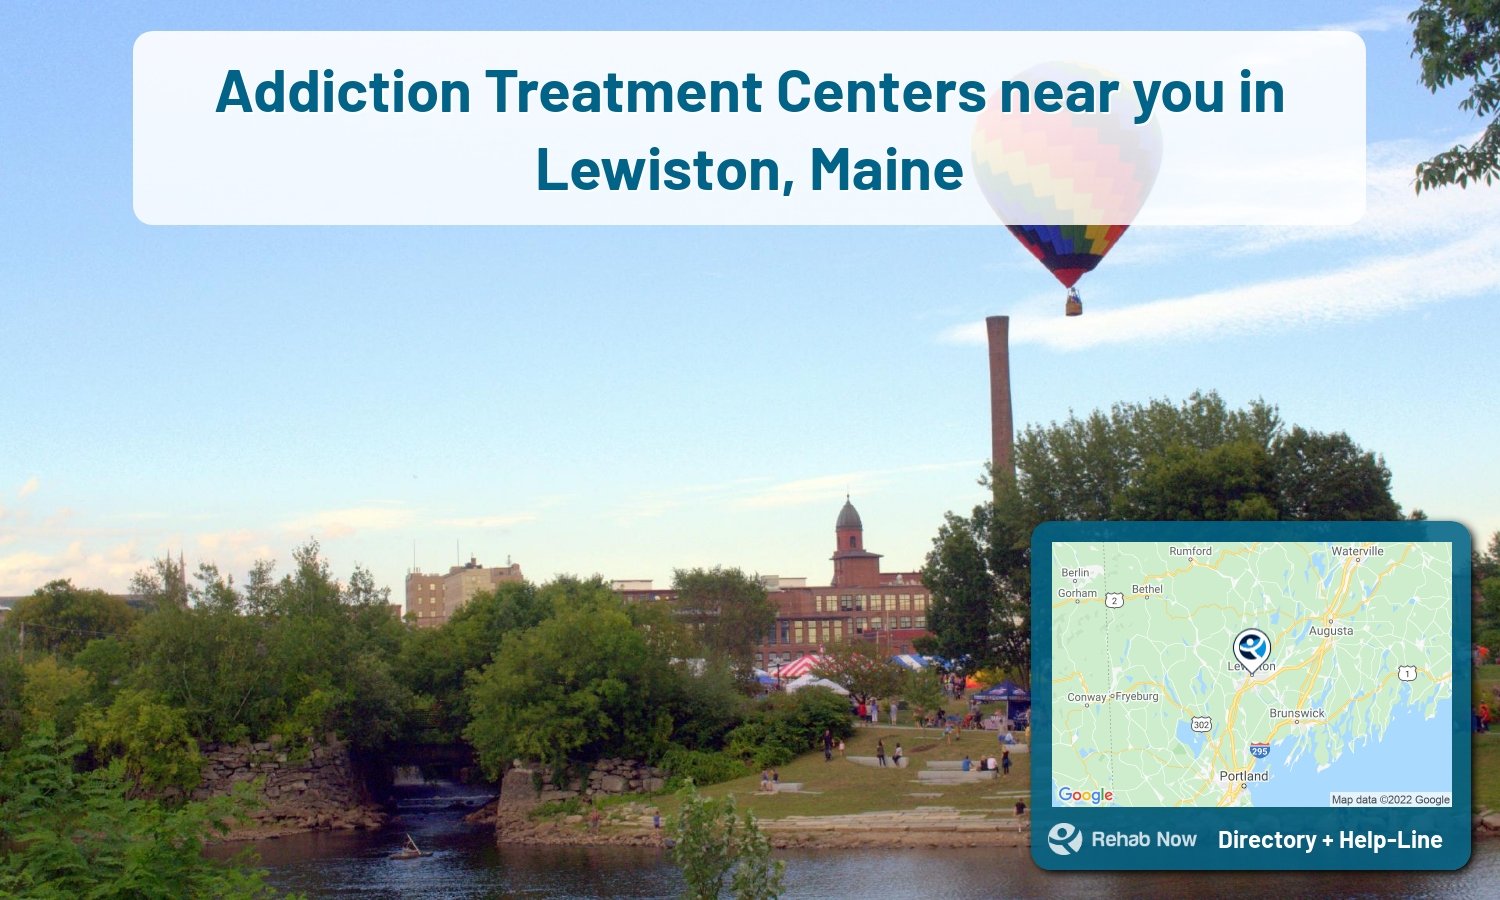 Lewiston, ME Treatment Centers. Find drug rehab in Lewiston, Maine, or detox and treatment programs. Get the right help now!